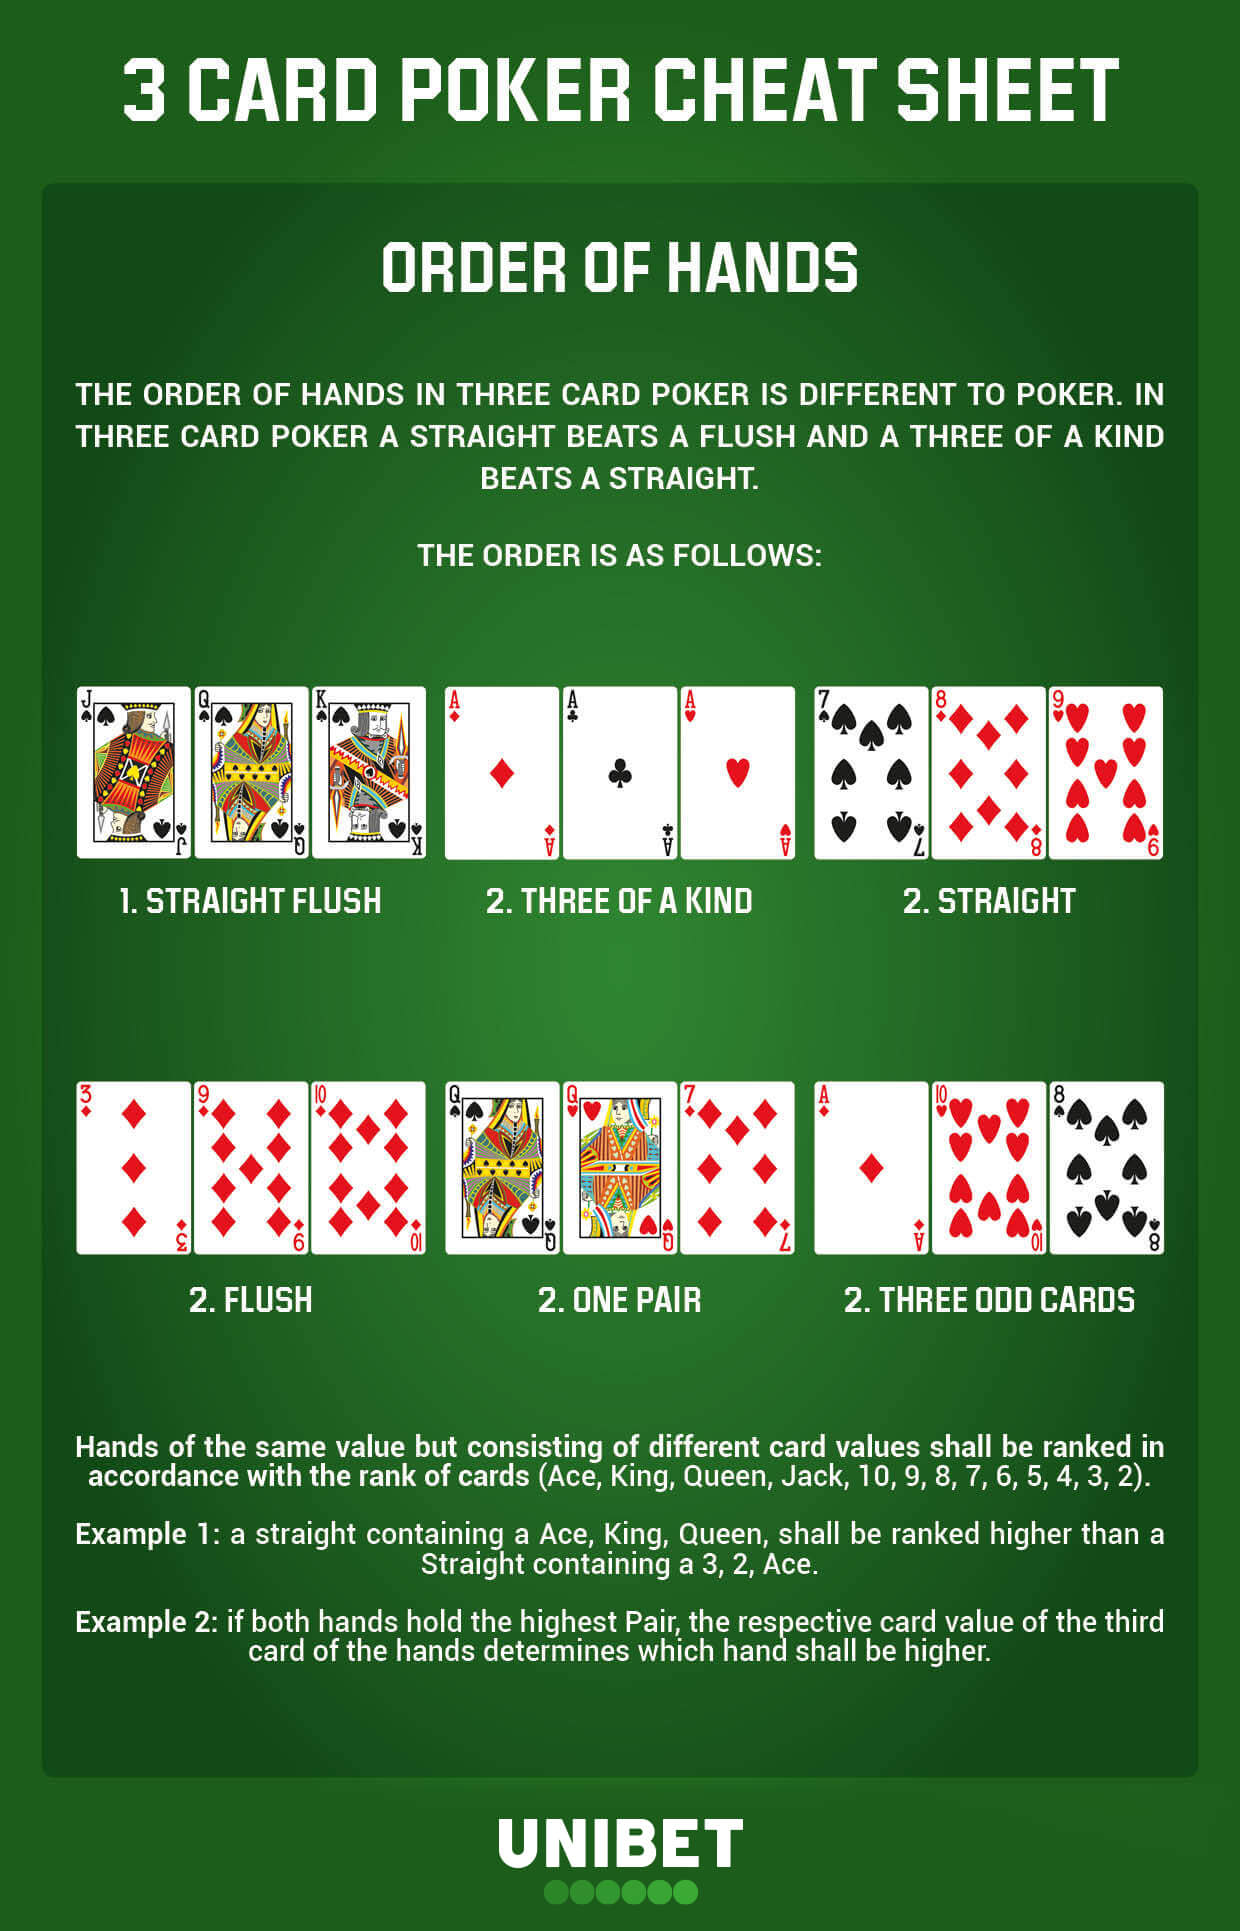 Top Three Card Poker Tips for Beginners